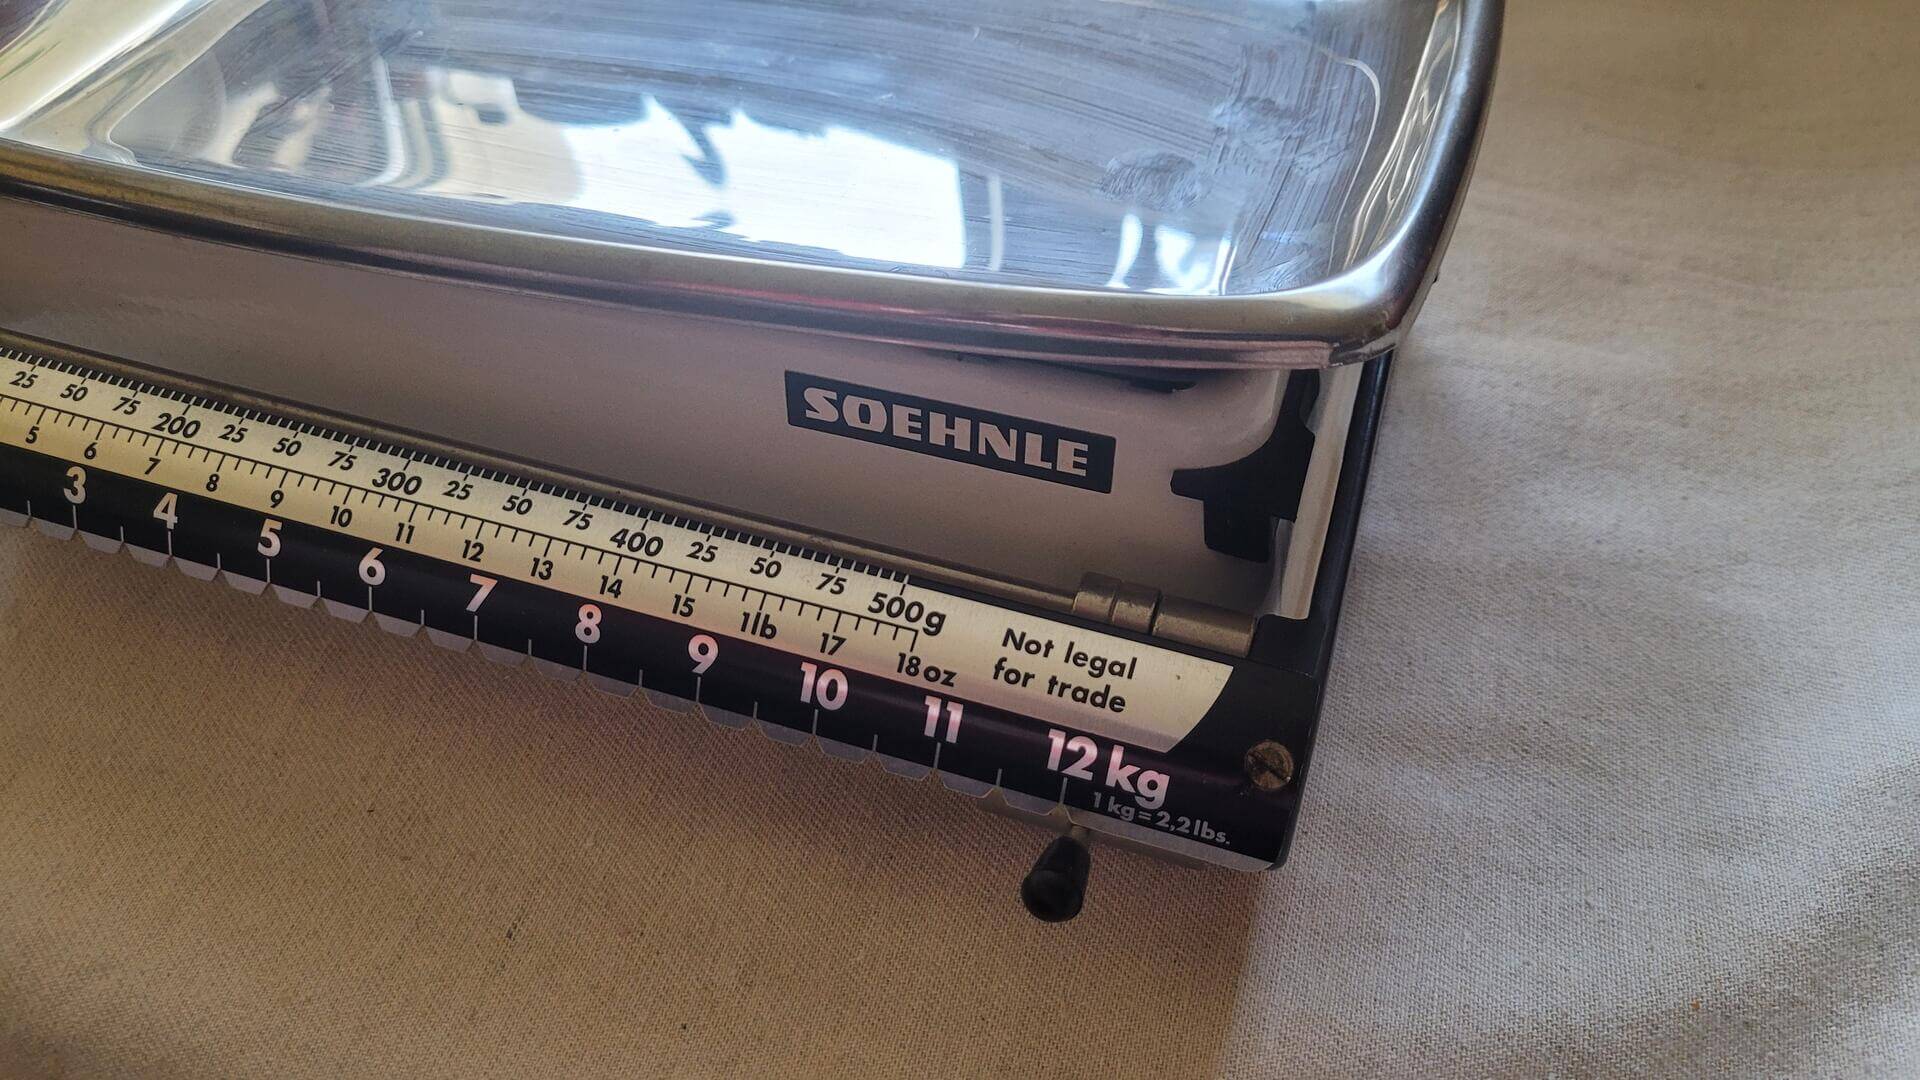 Nice retro 1960s Soehnle sliding 12 kg white mechanical kitchen scale made in Germany - Vintage mid century collectible kitchenware and measuring tool